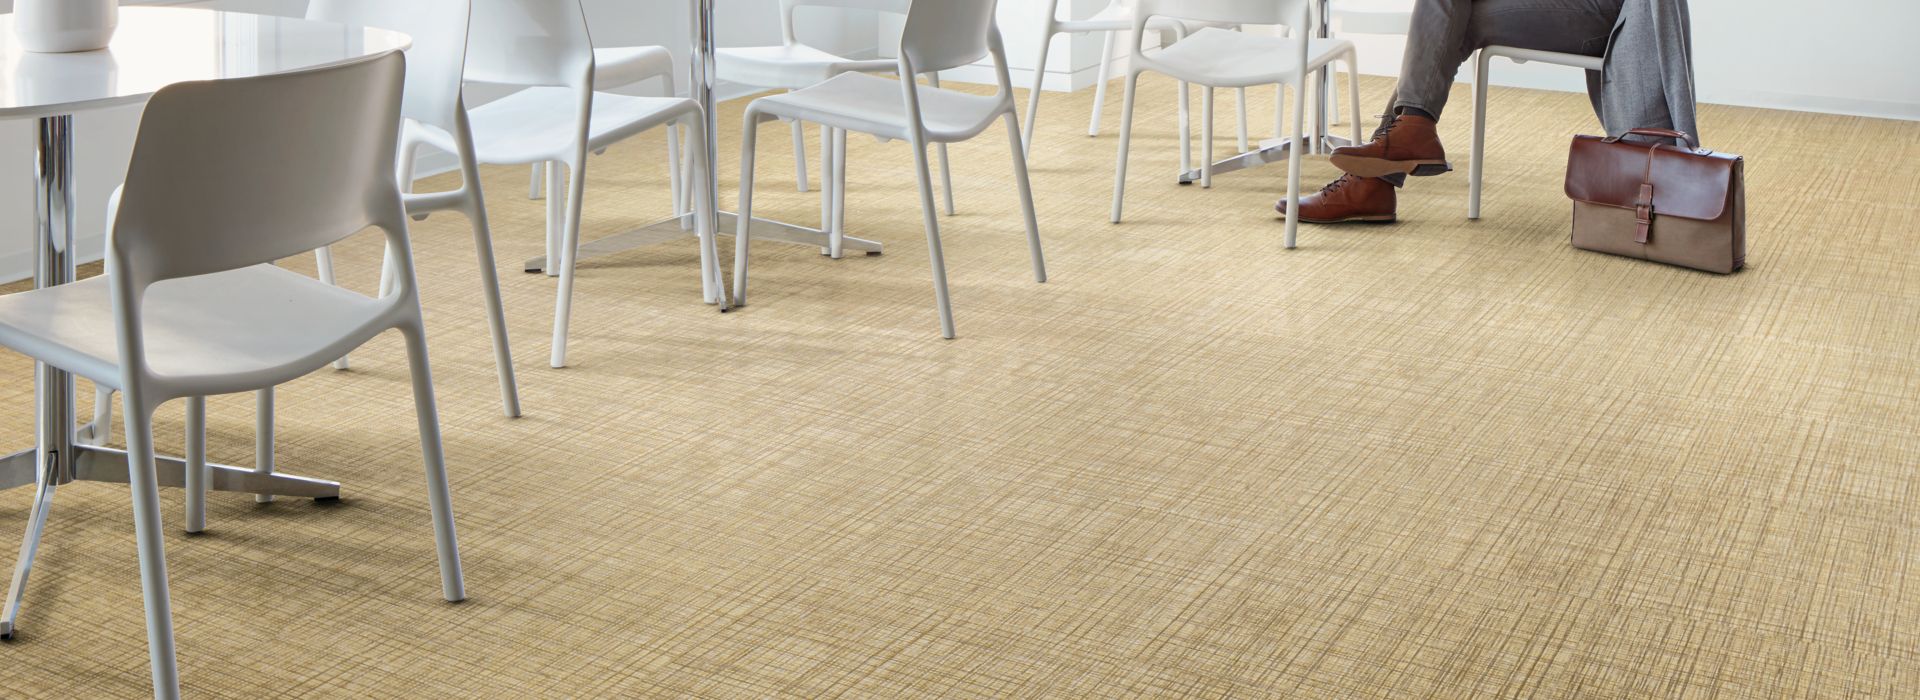 Interface Native Fabric LVT in office common area with tables and chairs